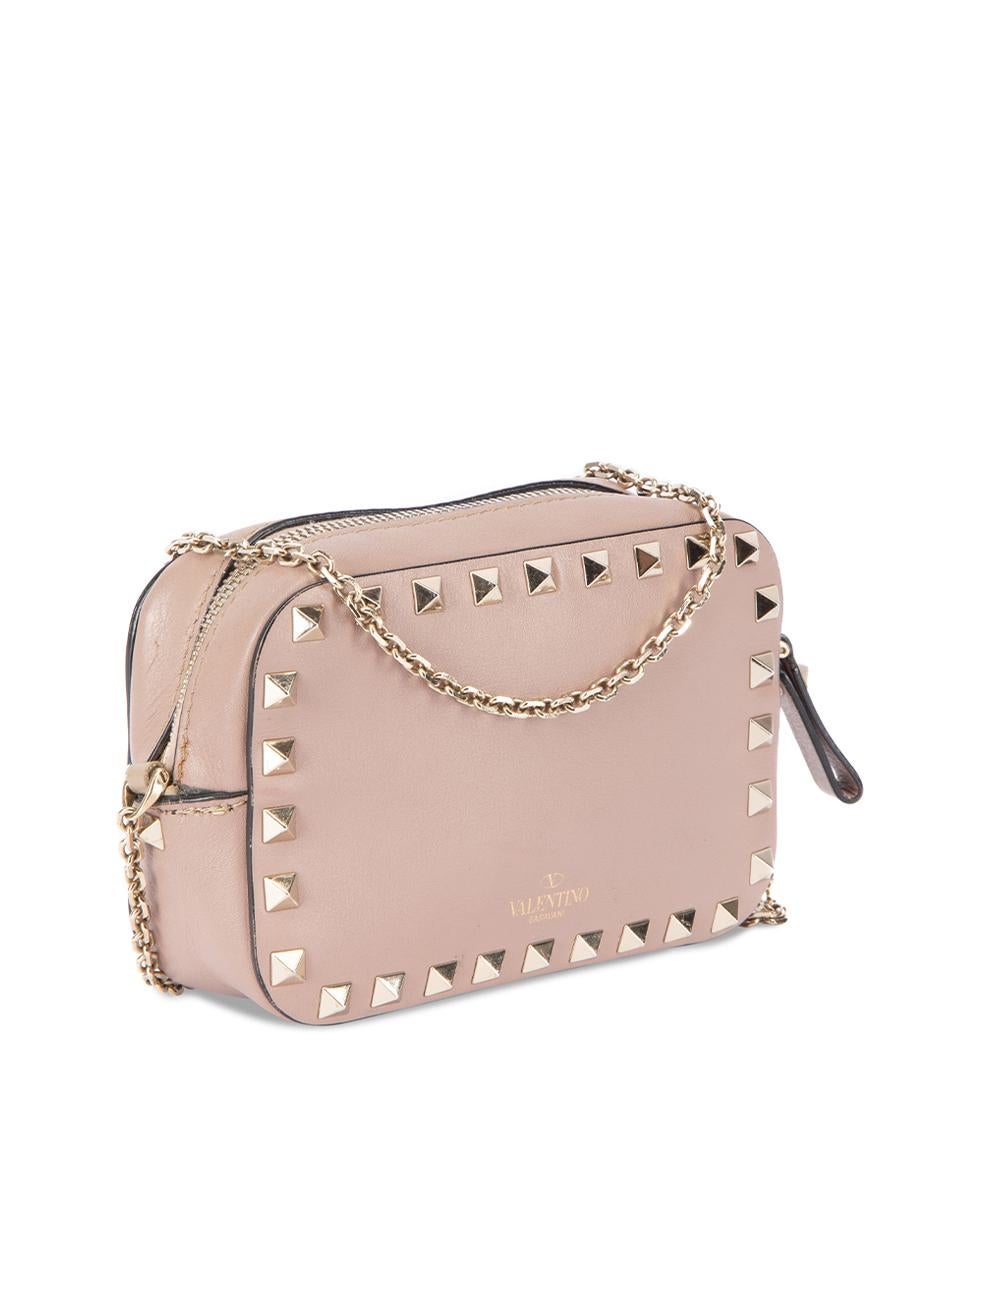 CONDITION is Very good. Minimal wear to bag is evident where scuffs and stain can be seen on the exterior and interior of bag on this used Valentino Garavani designer resale item.   Details  Pink Leather Mini crossbody bag Rockstud embellishment 1x